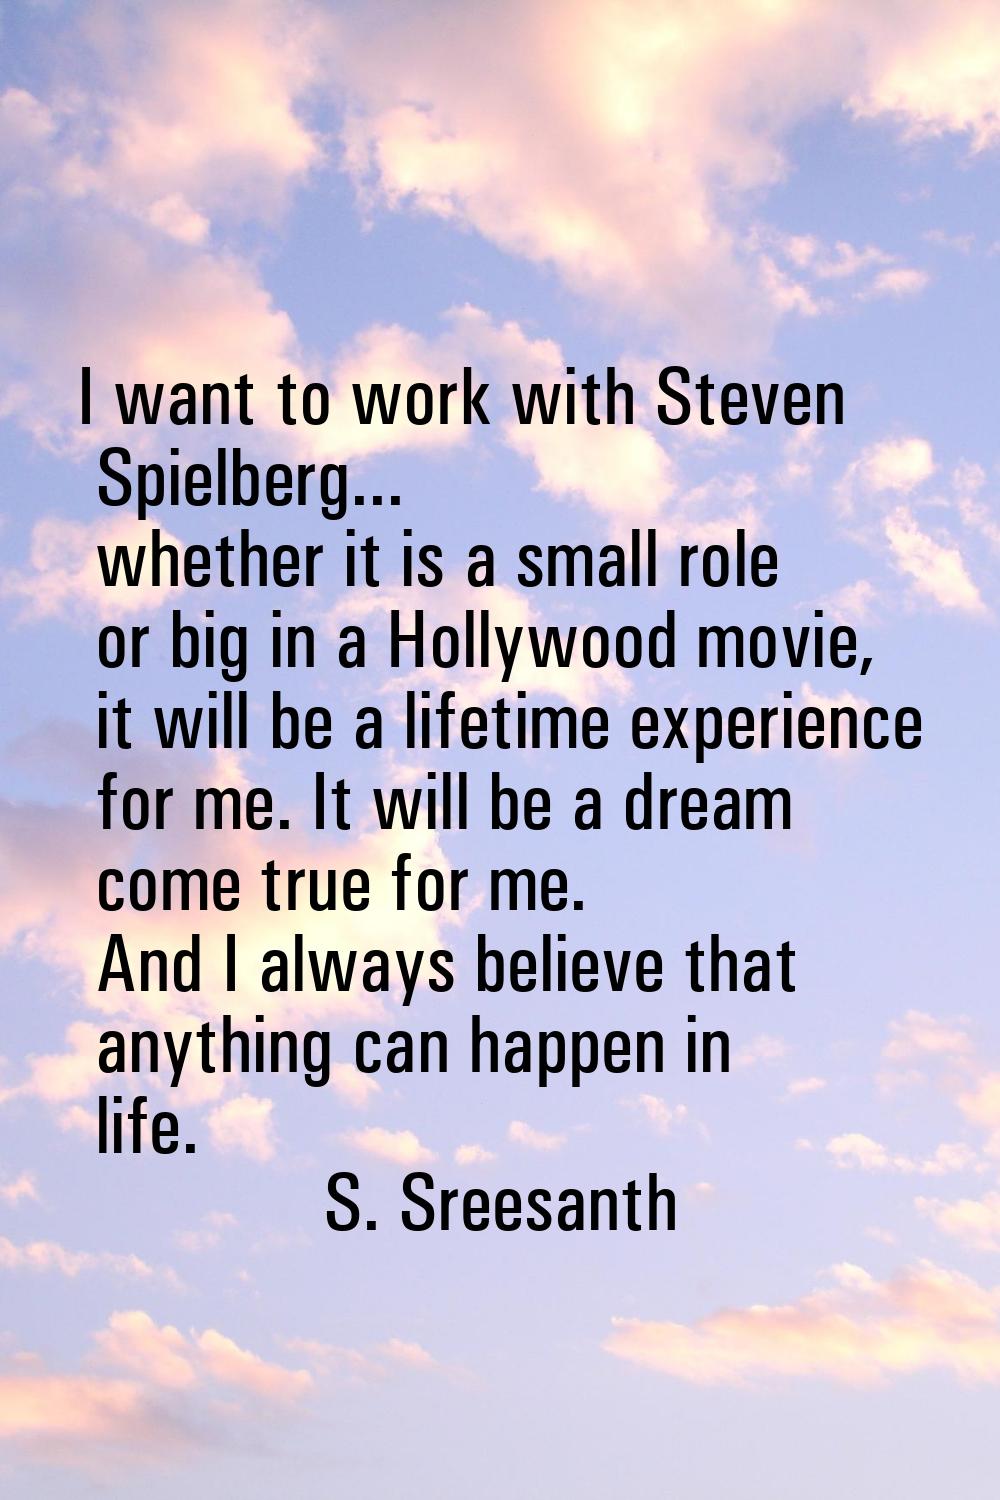 I want to work with Steven Spielberg... whether it is a small role or big in a Hollywood movie, it 